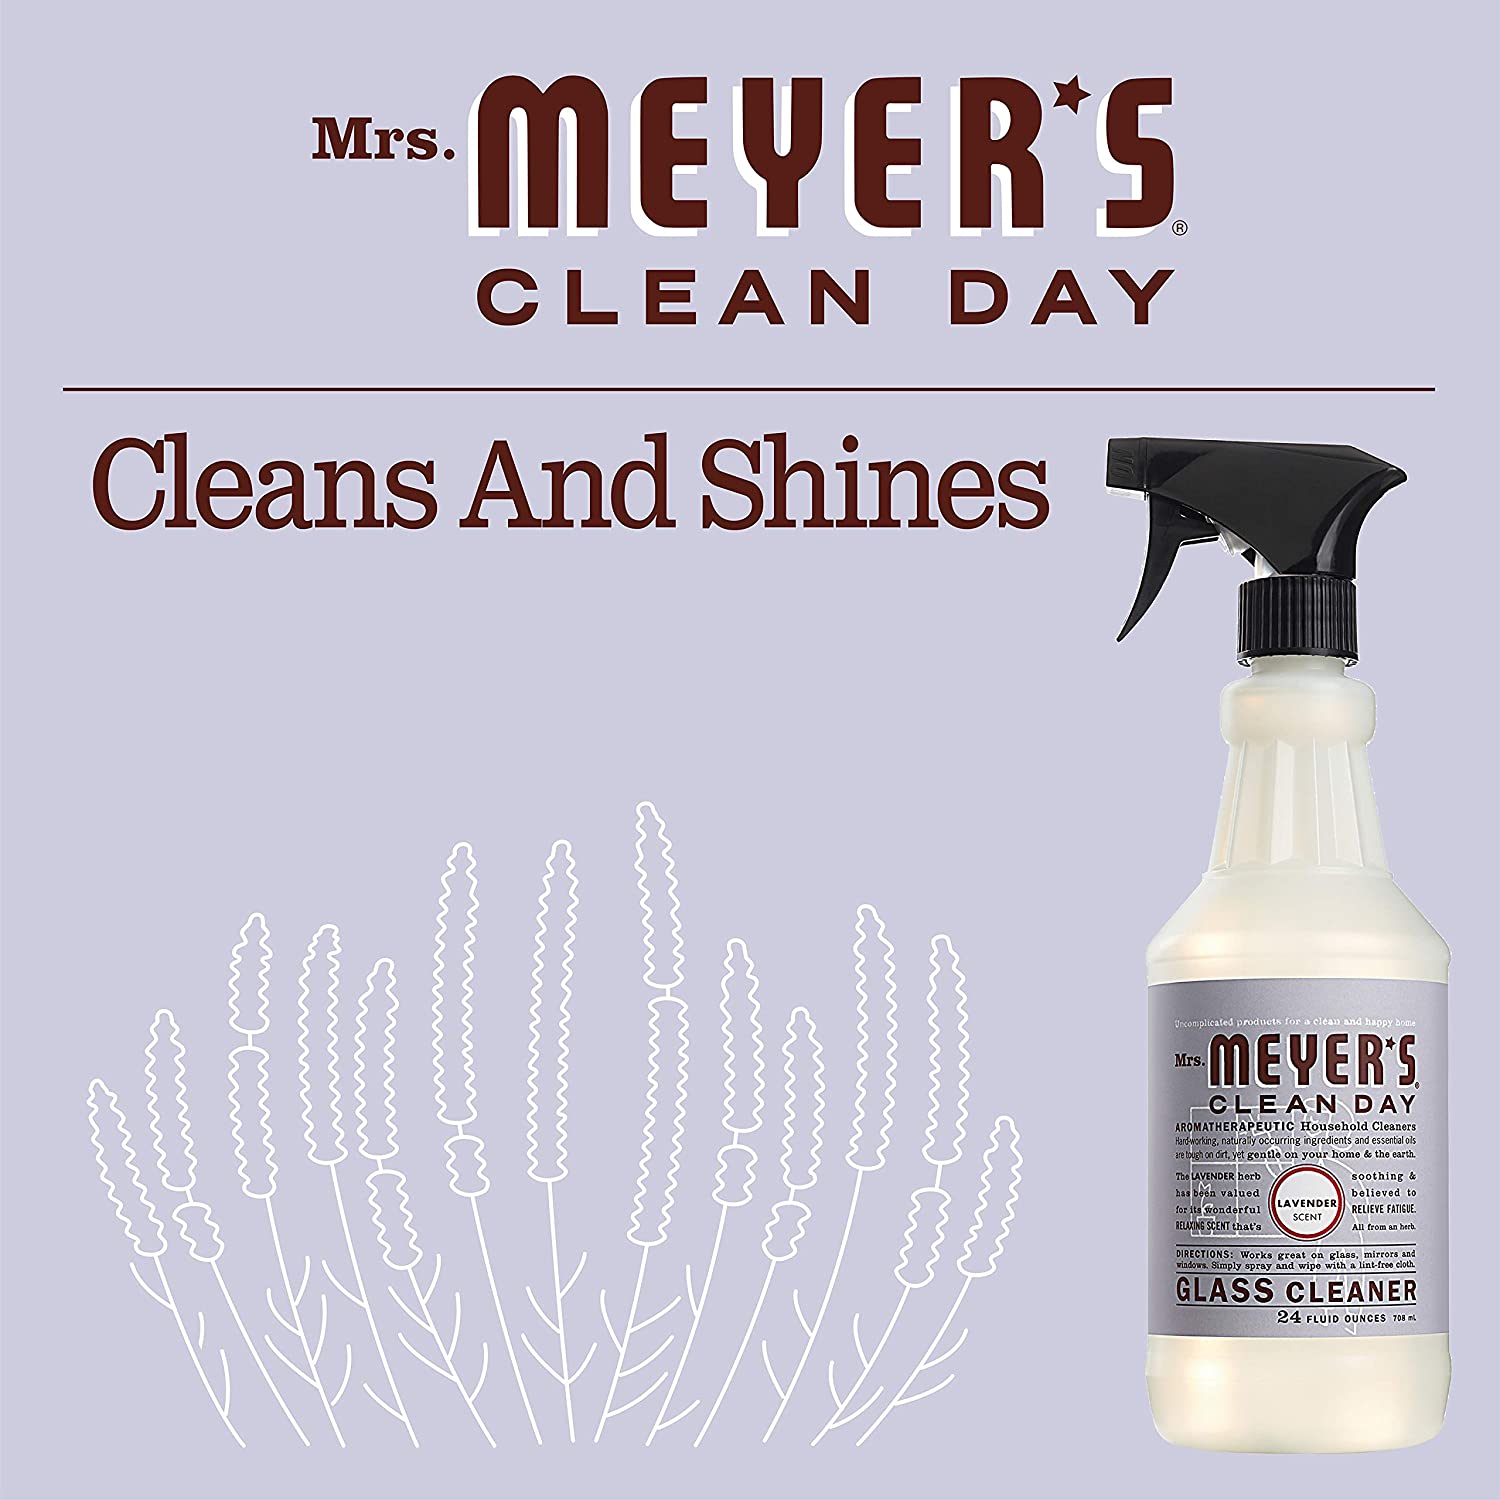 MRS. MEYER'S CLEAN DAY Glass Cleaner in Lavender